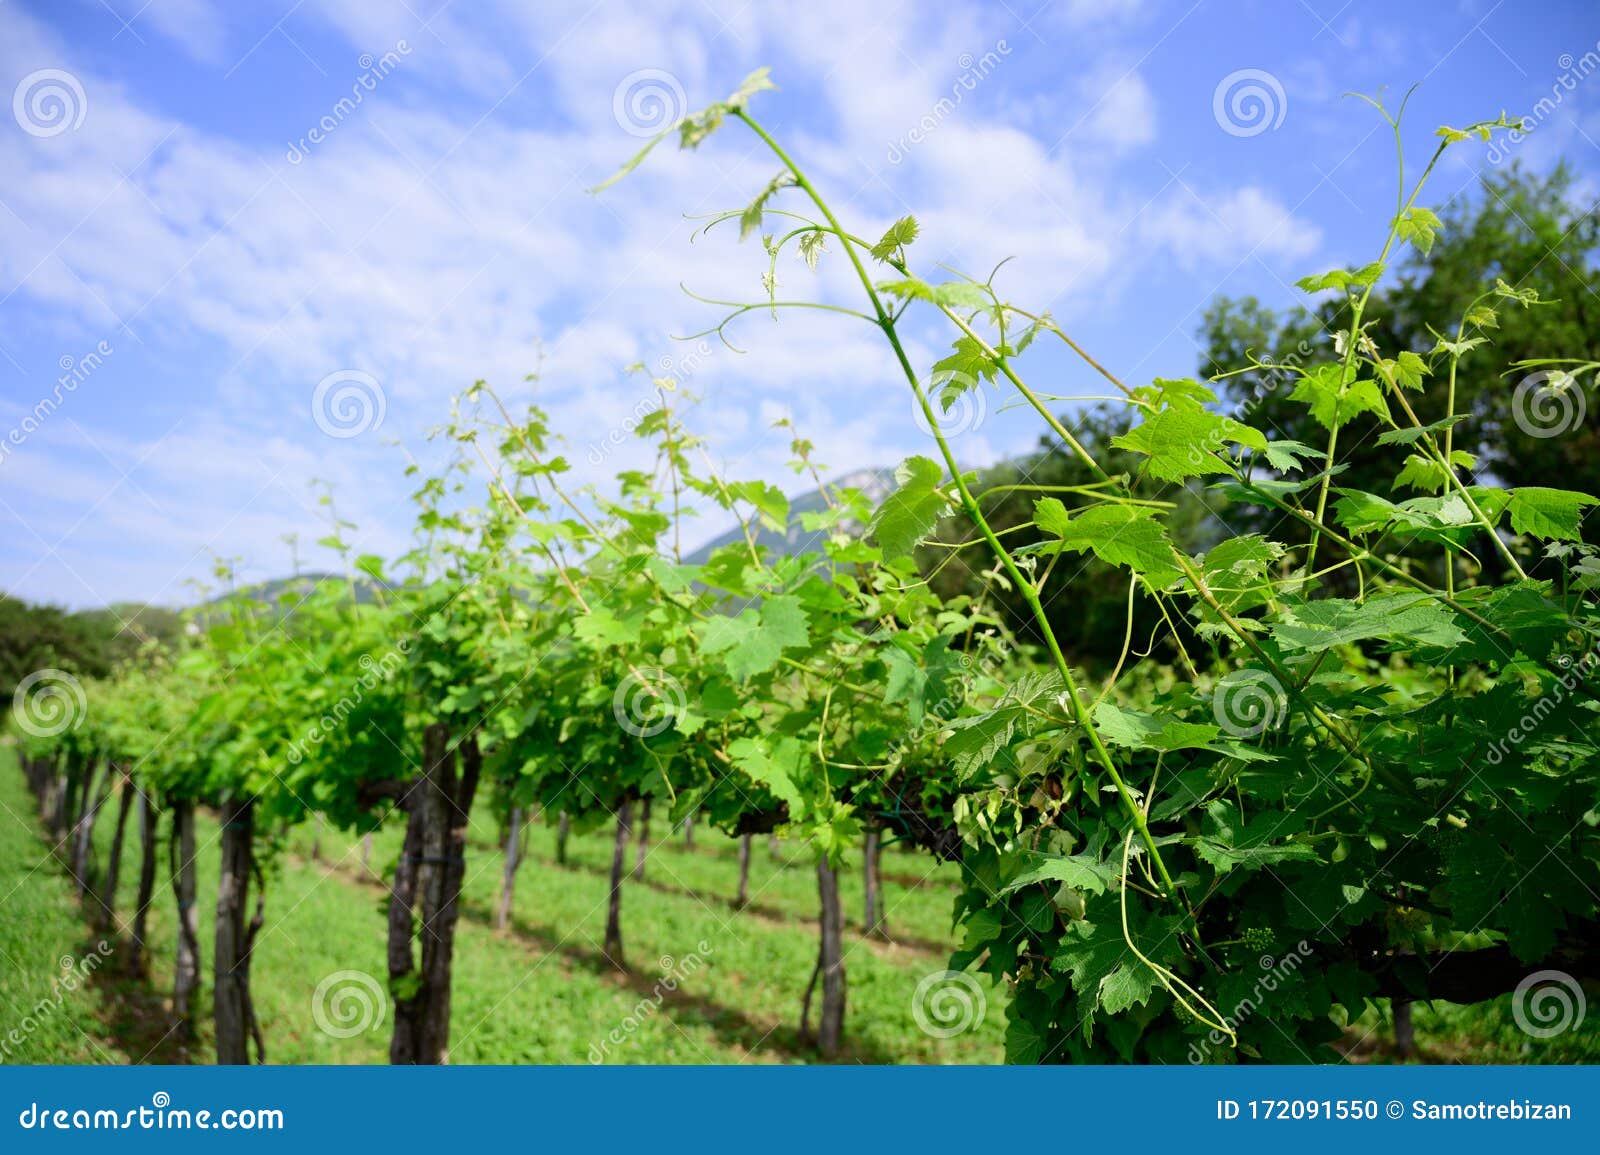 vineyard in early spring with blie sky and clouds in background